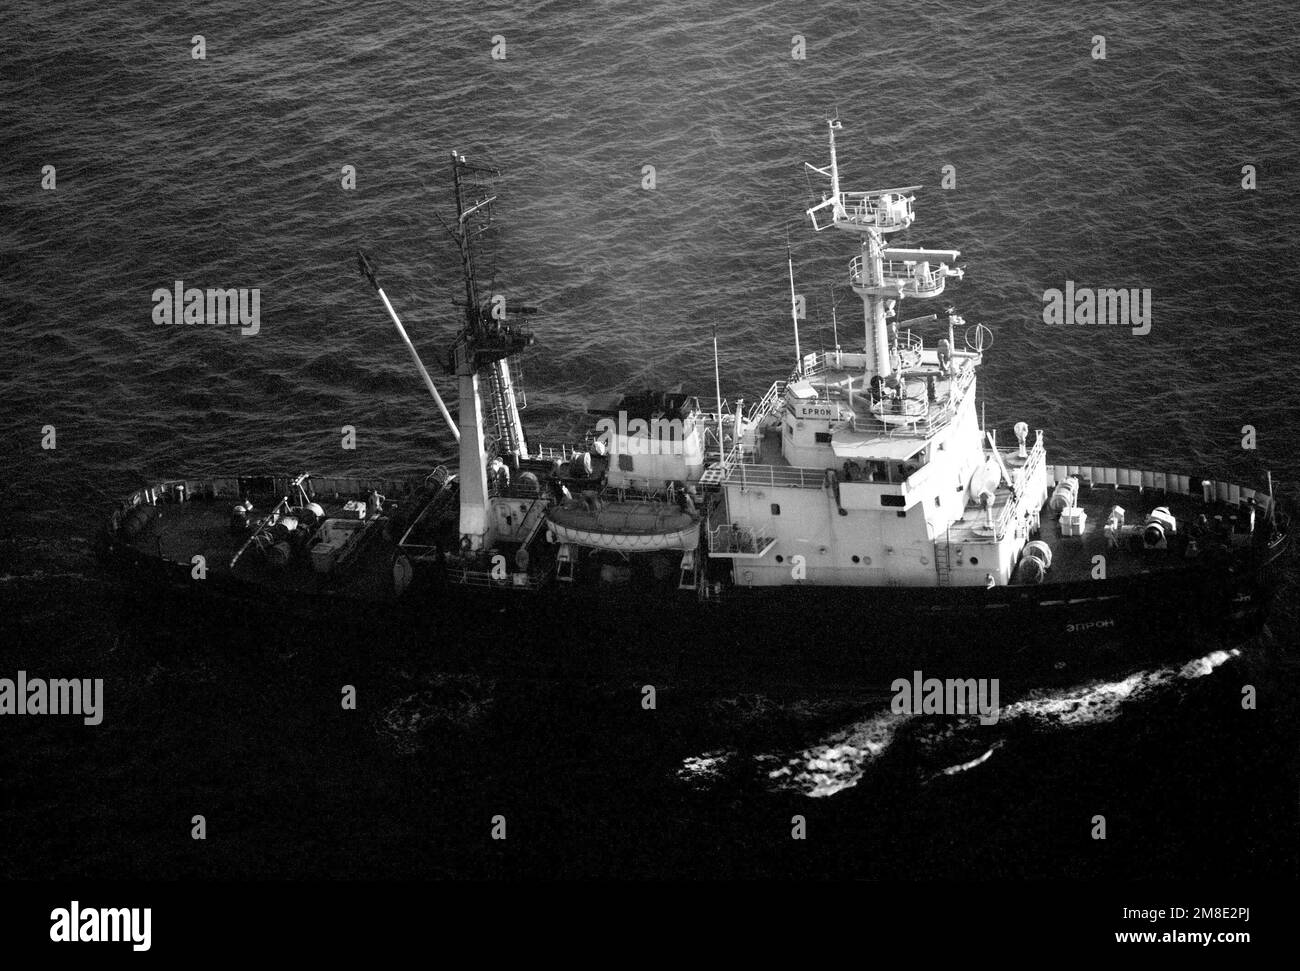 A starboard beam view of a Soviet merchant marine seagoing tug Epron underway. Country: Unknown Stock Photo